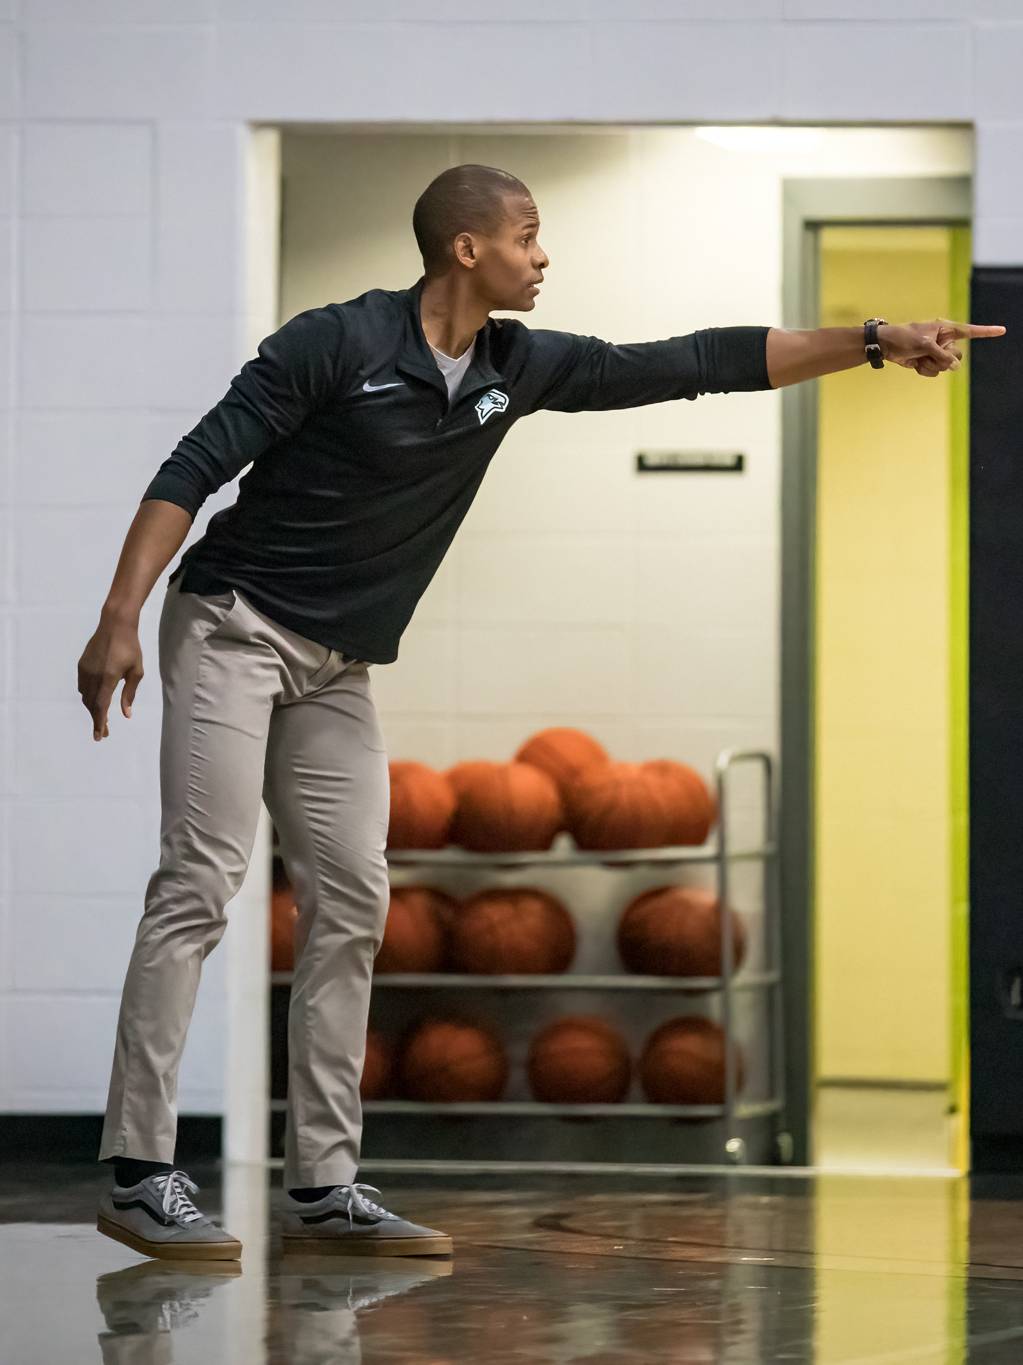 Coach Dominique Battles on basketball court pointing with left hand.